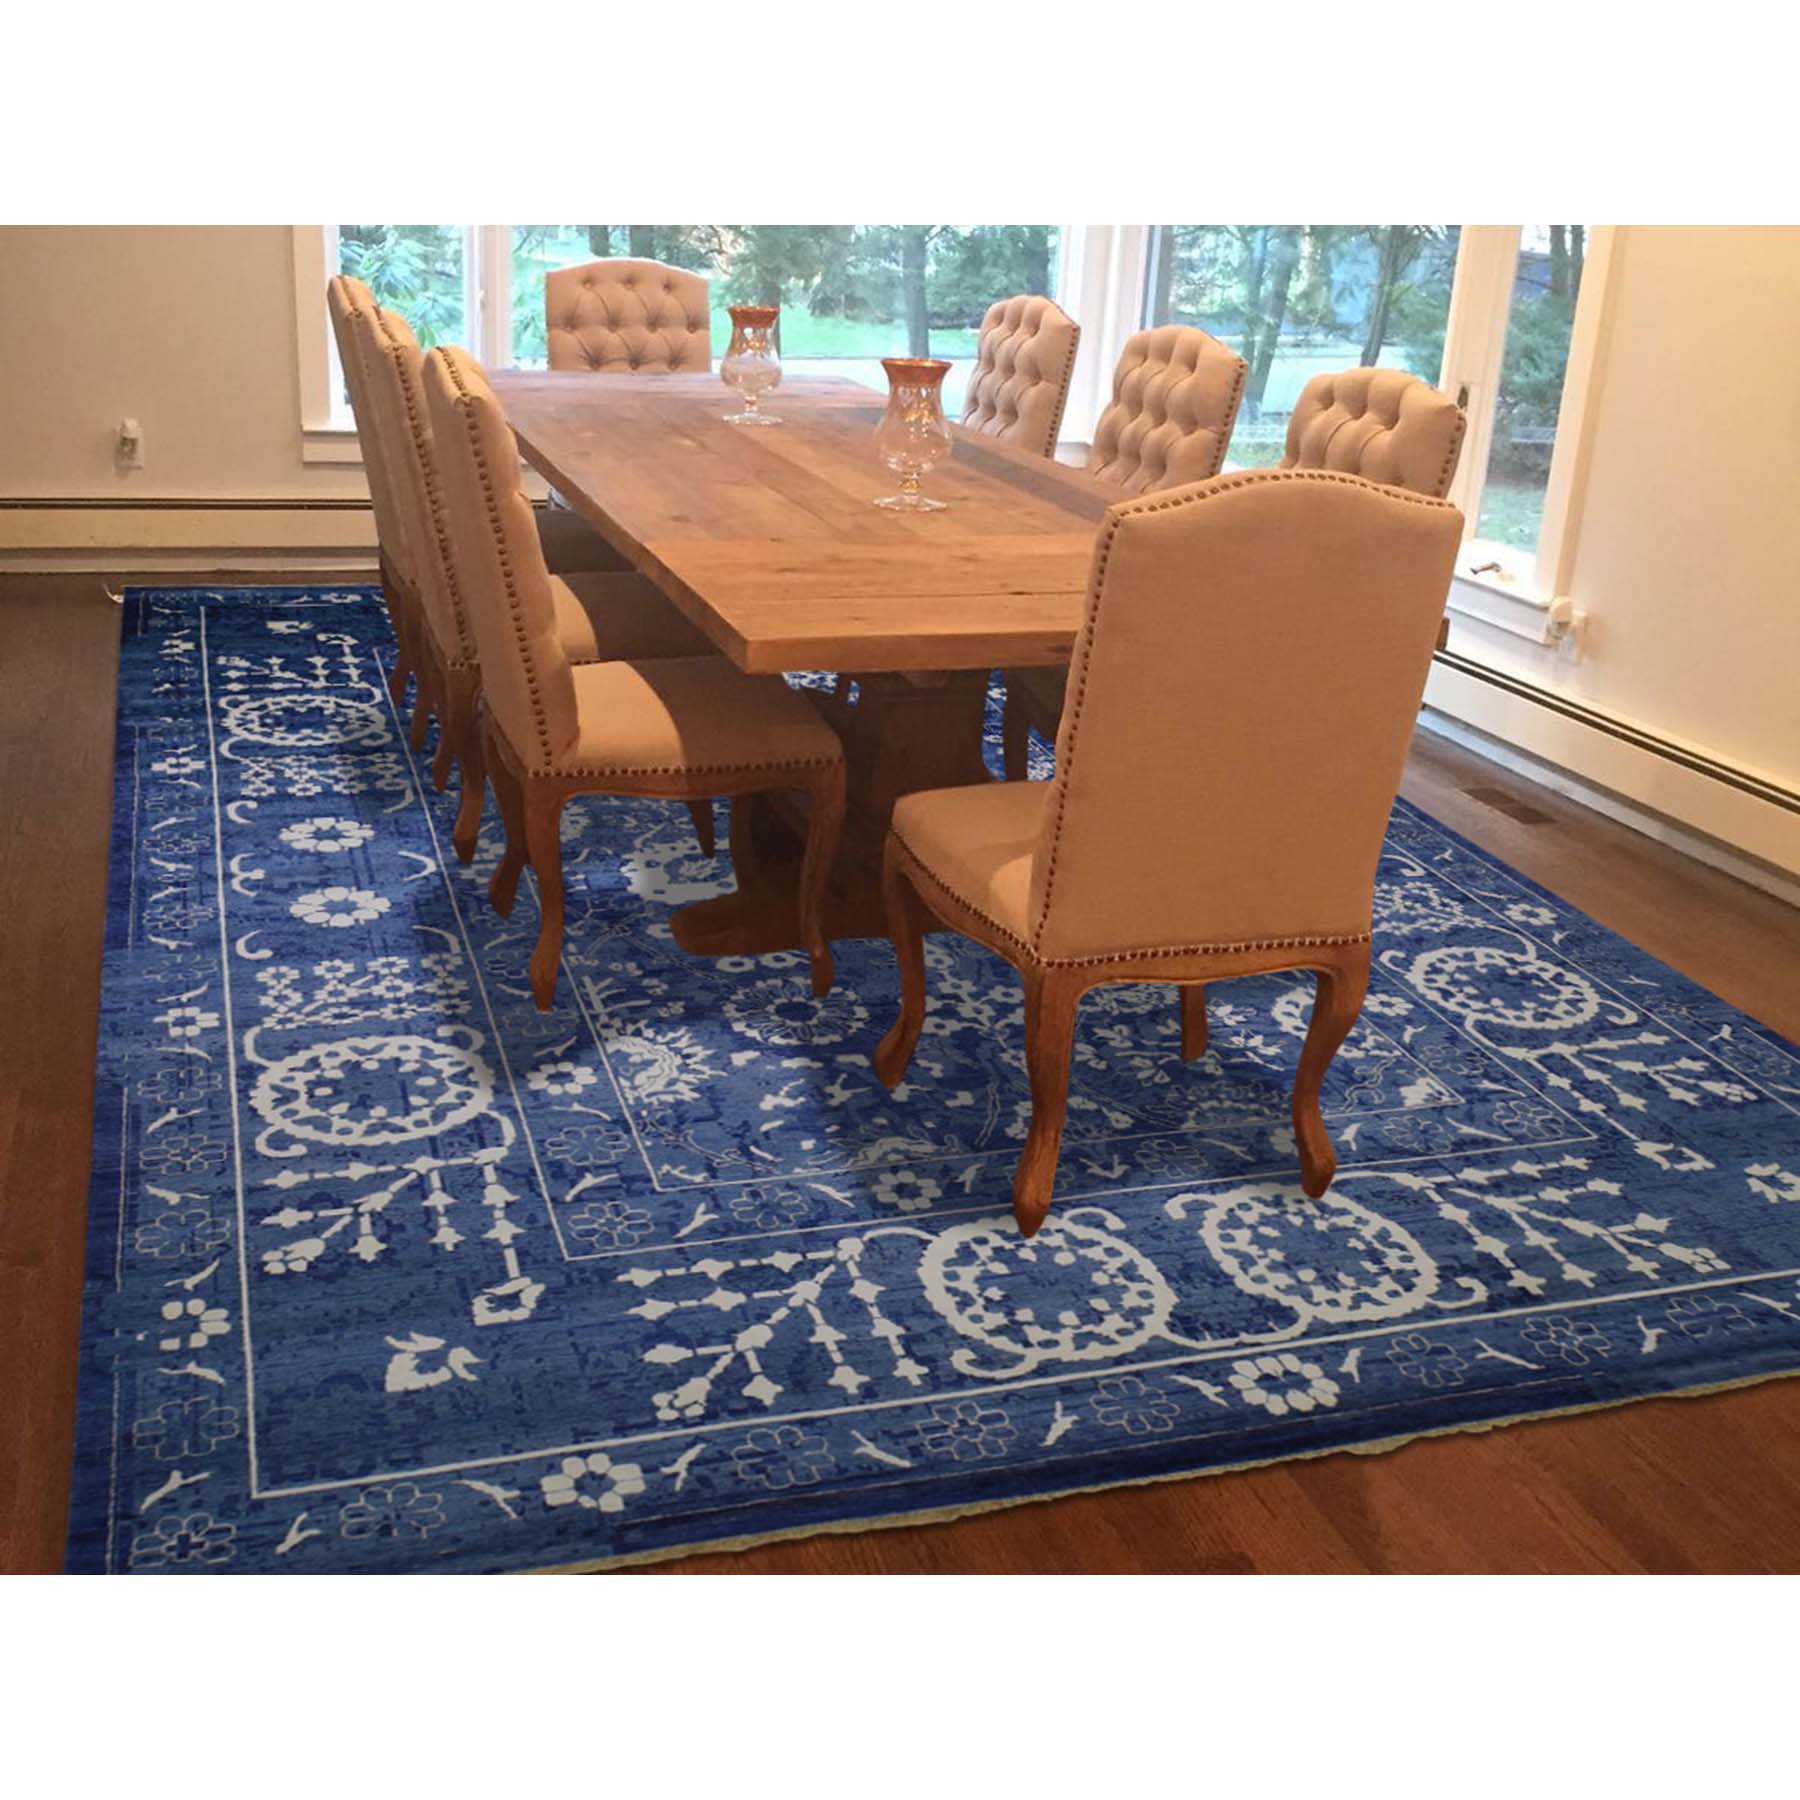 12-1 x18-2  Oversized Hand-Knotted Wool and Silk Tone on Tone Tabriz Oriental Rug 